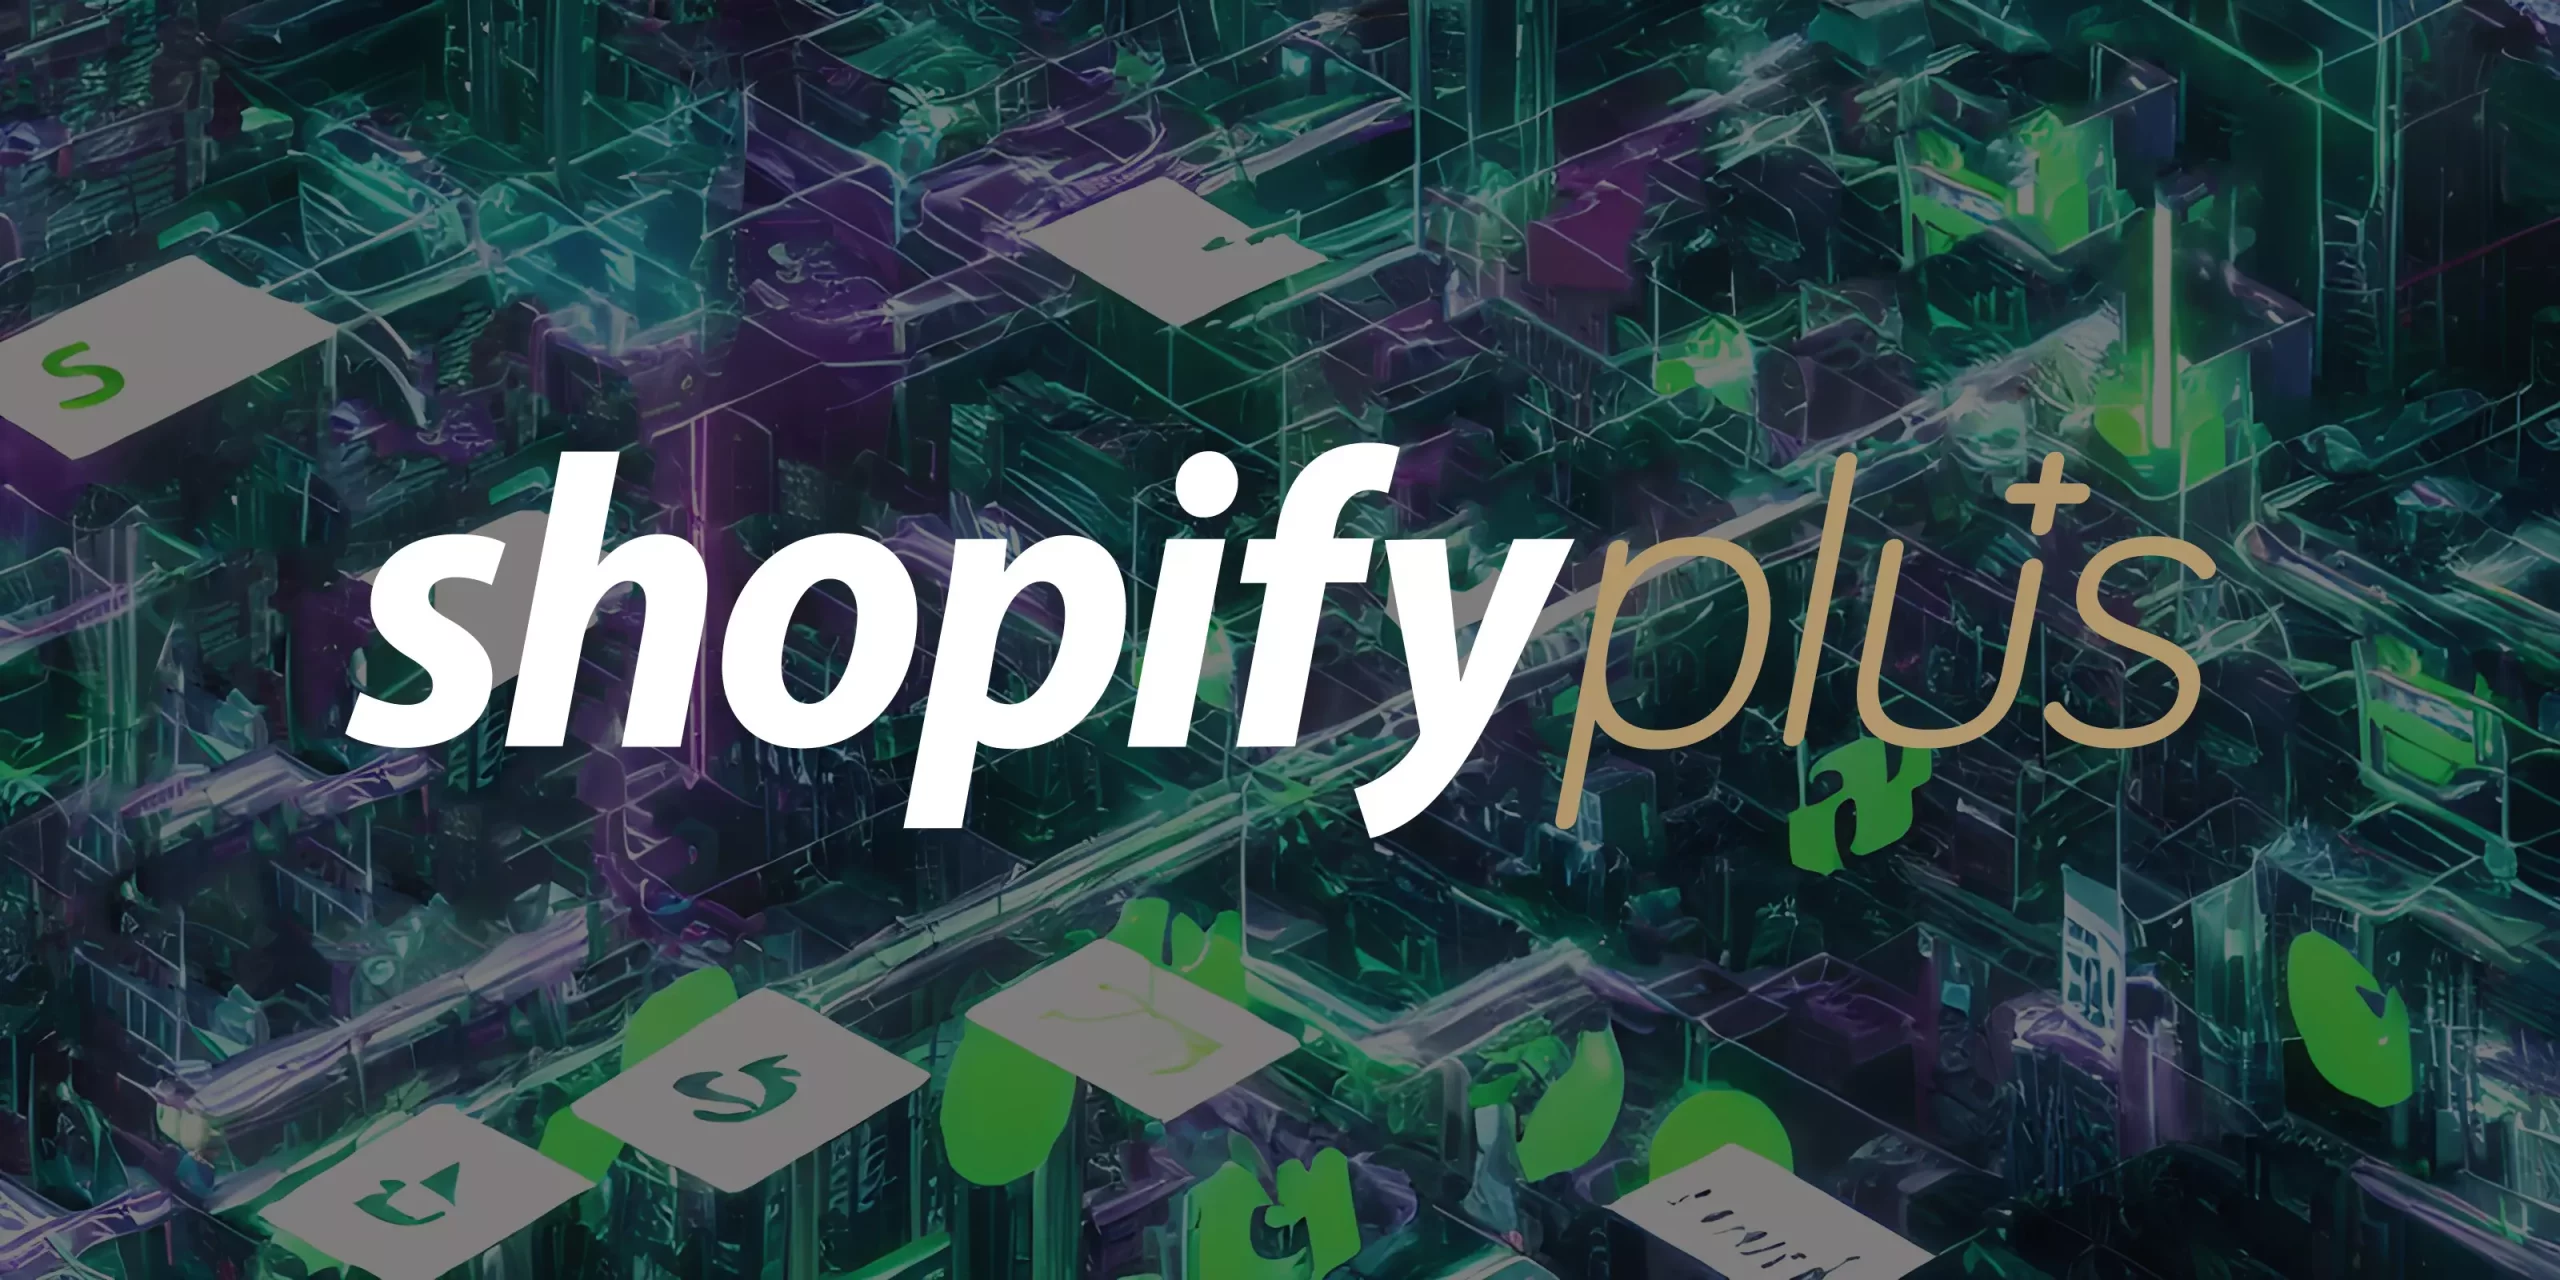 Shopify Plus allows up to 9 expansion stores